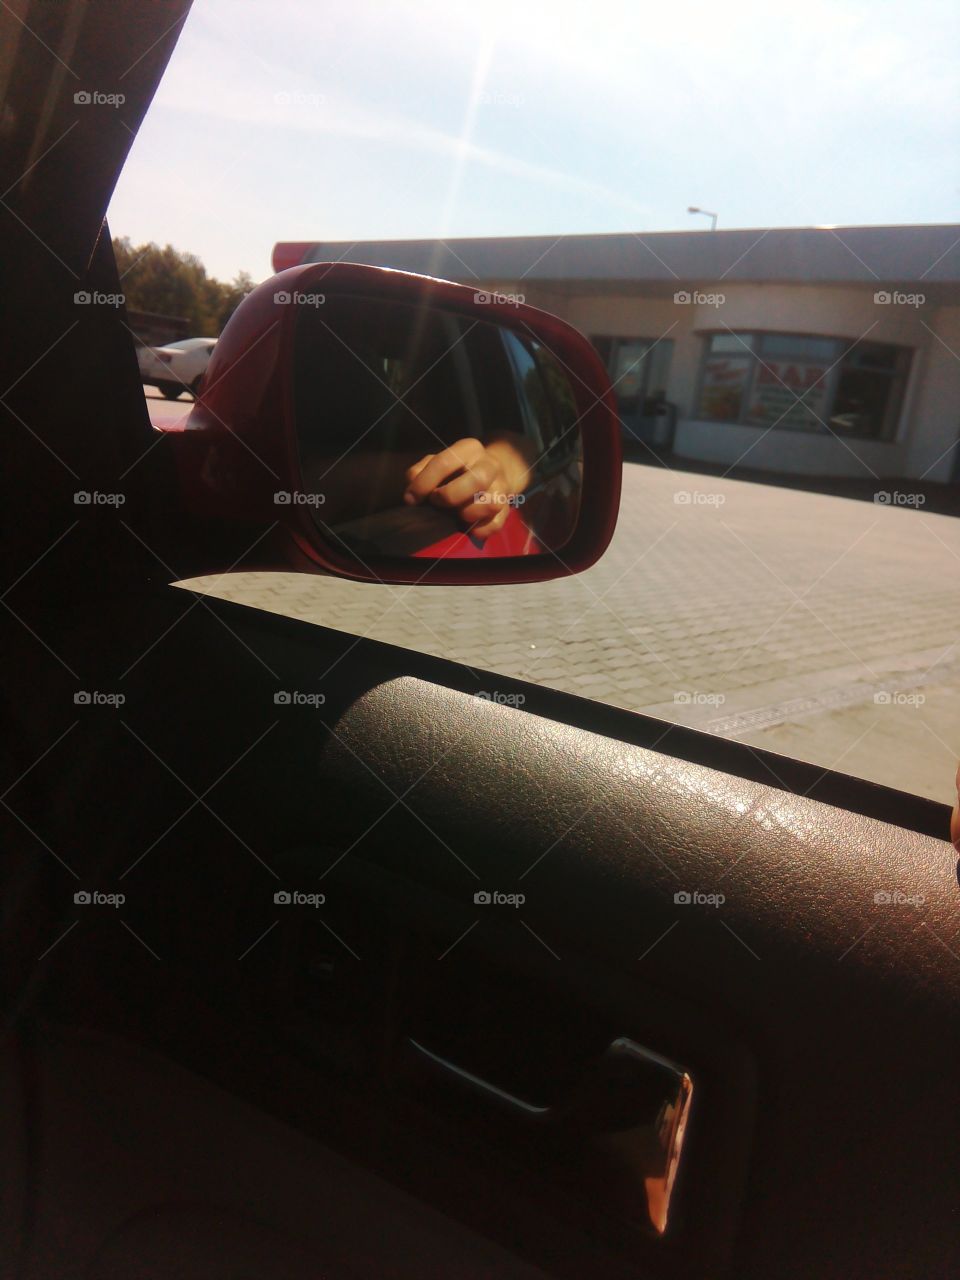 in the car mirror